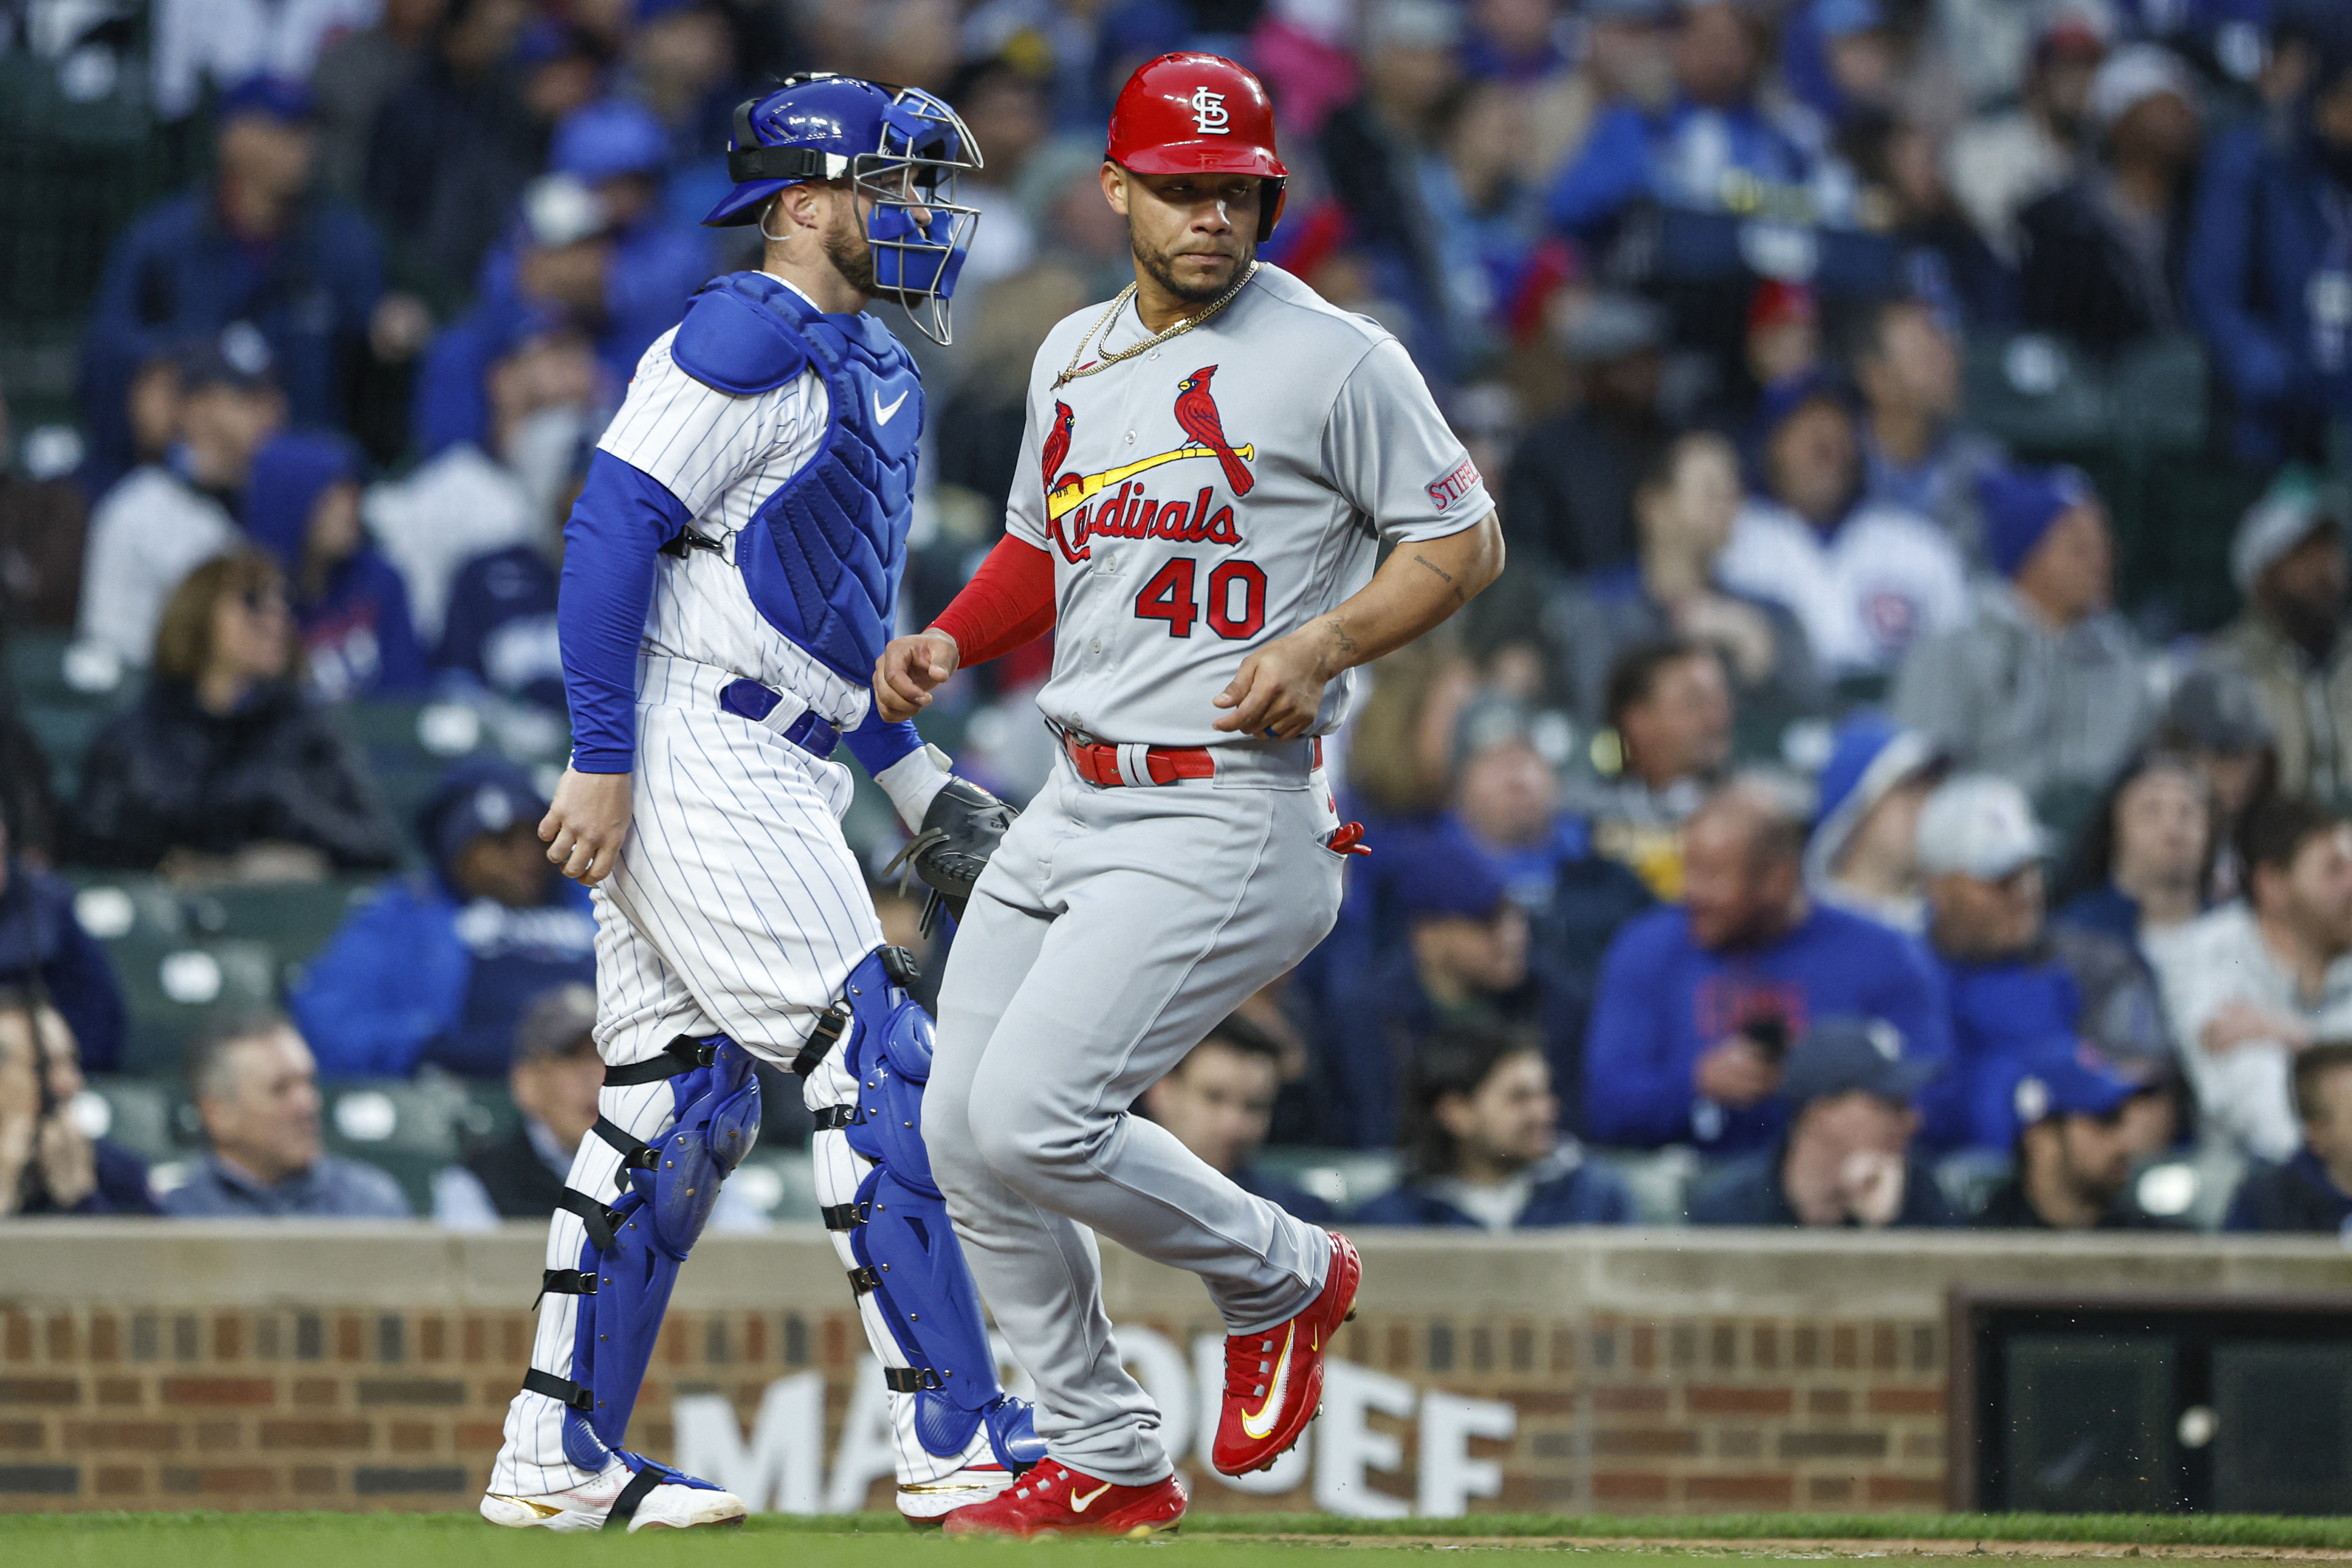 Contreras leads Cardinals past Cubs 3-1 in return to Wrigley - The San  Diego Union-Tribune